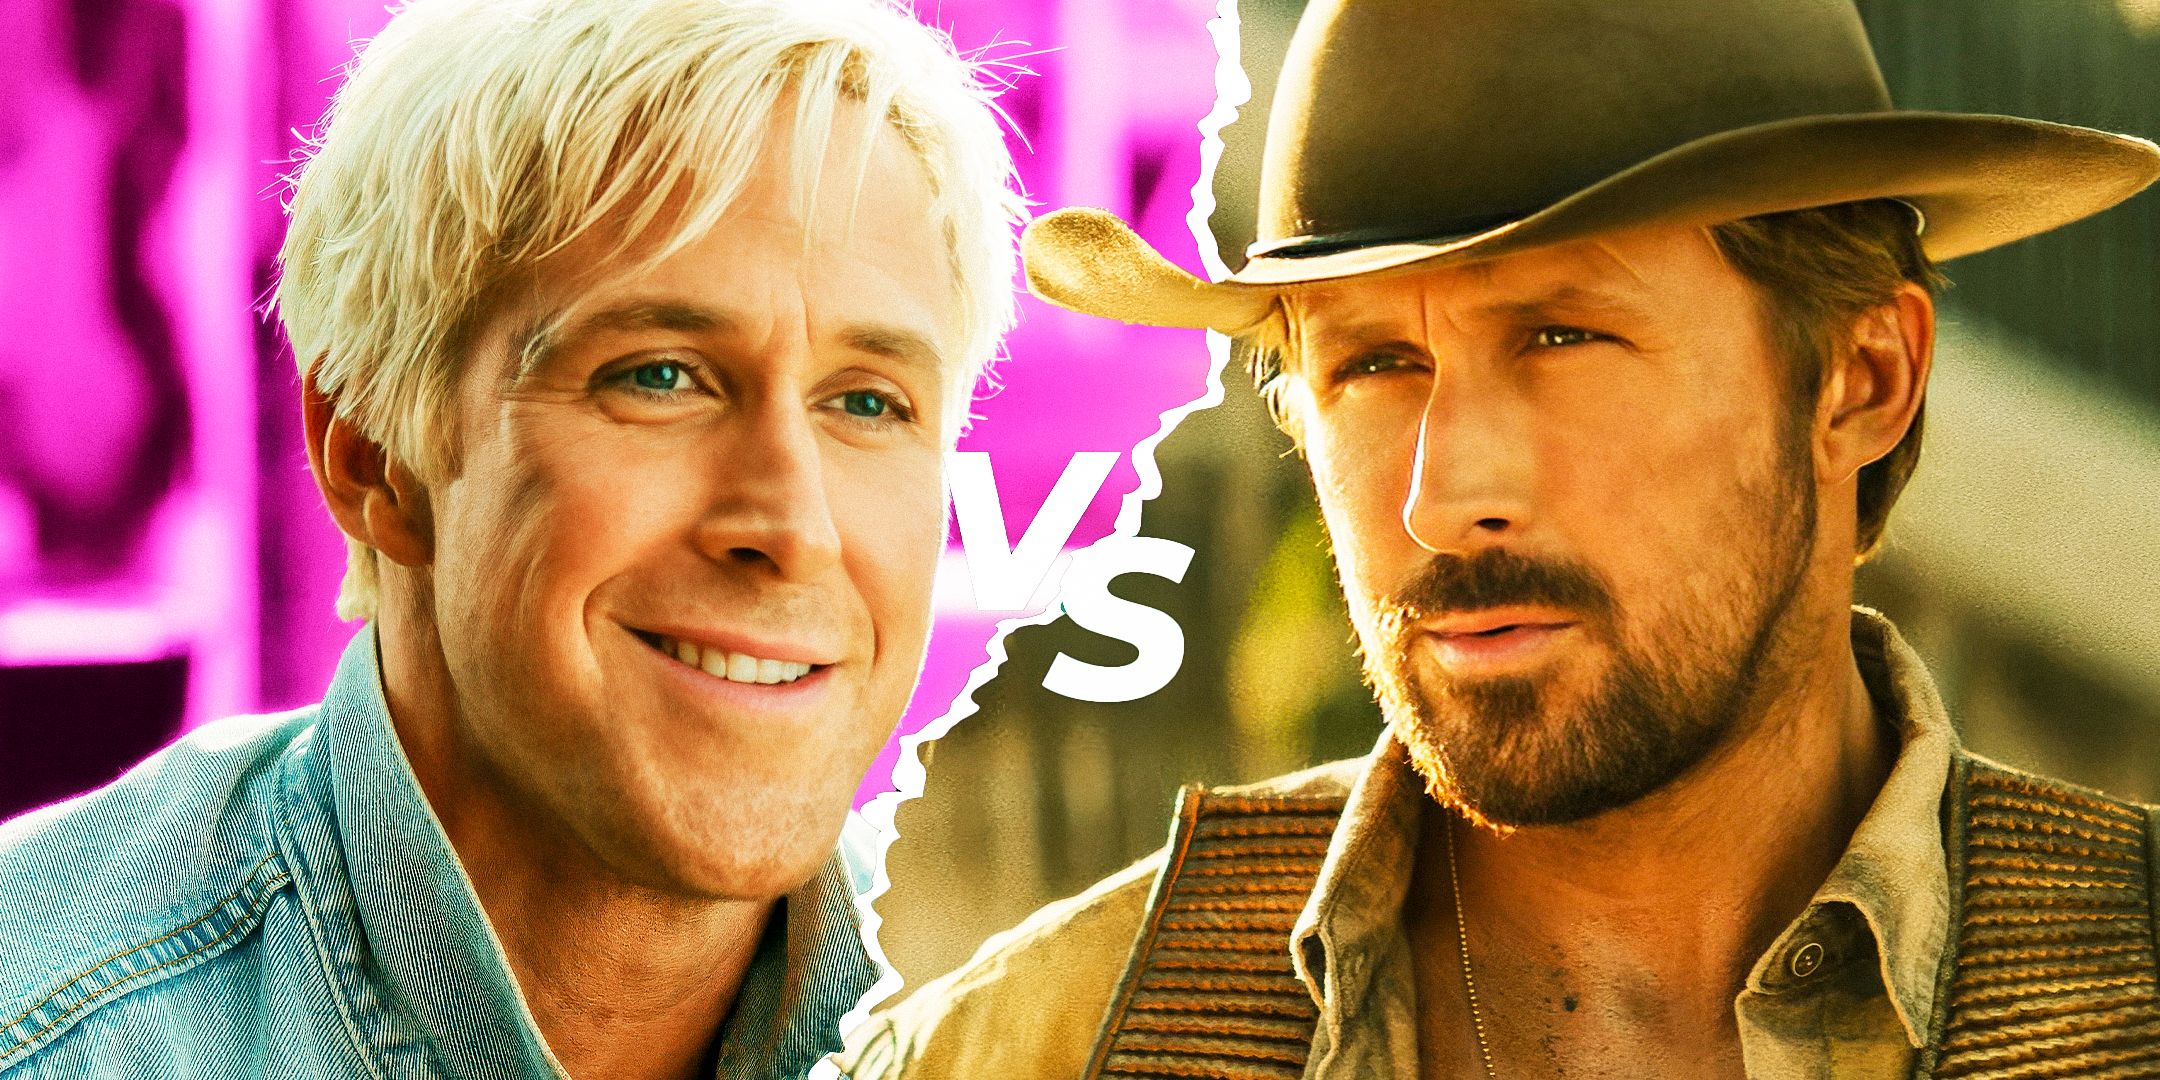 Ryan-Gosling-as-Colt-Seavers-from-The-Fall-Guy-and--Ryan-Gosling-as-Ken-from-Barbie-